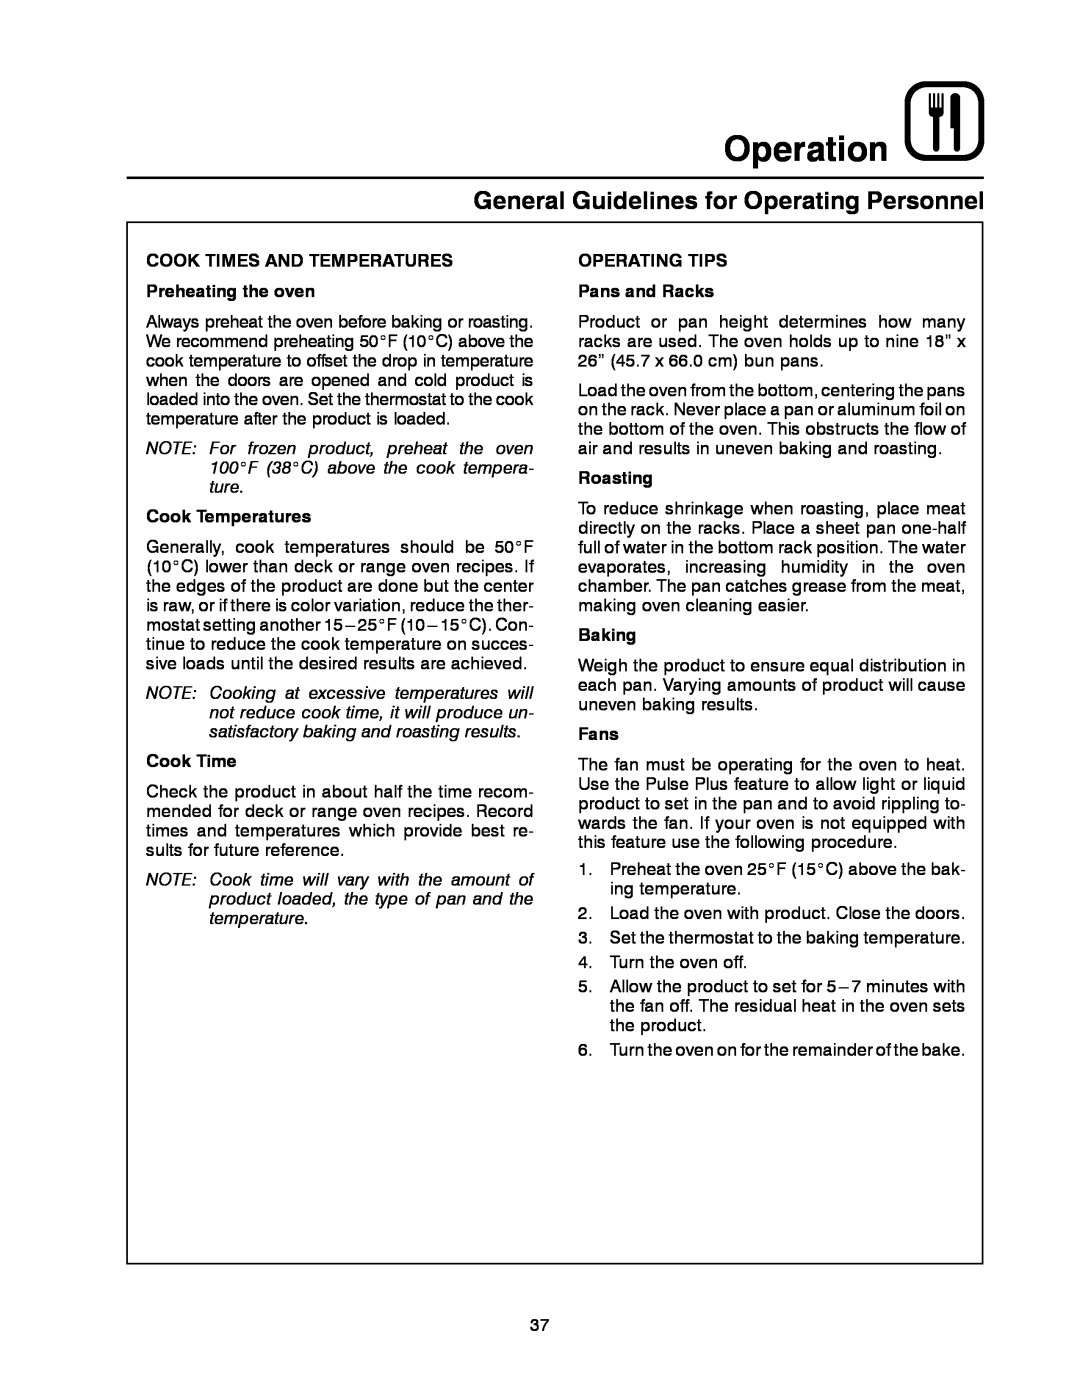 Blodgett DFG-50 General Guidelines for Operating Personnel, Operation, COOK TIMES AND TEMPERATURES Preheating the oven 